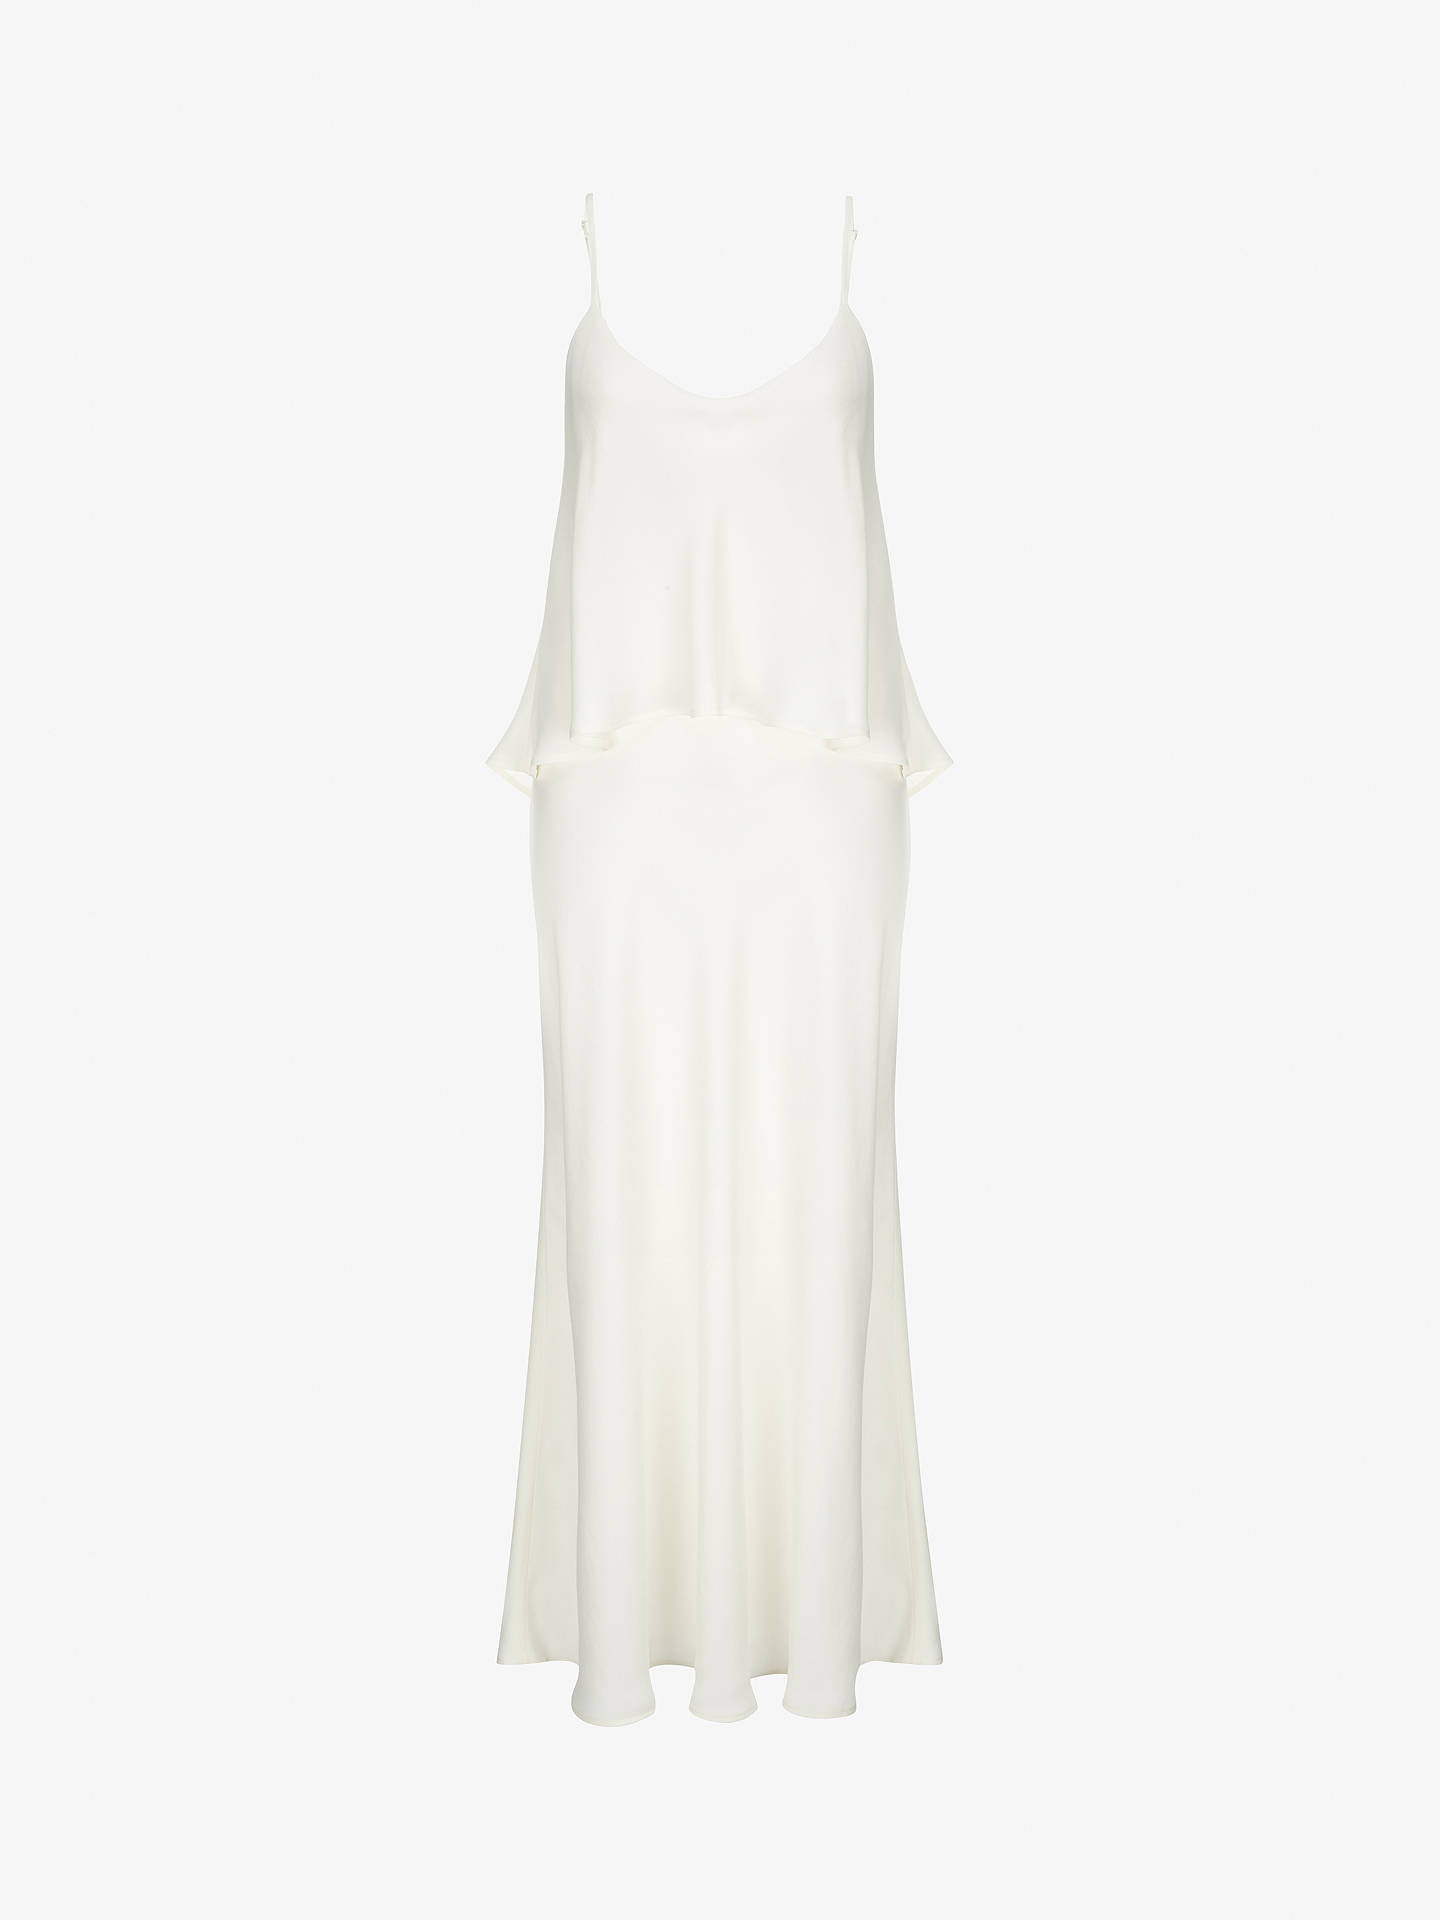 Finery Paige Double Layer Dress, Ivory at John Lewis & Partners